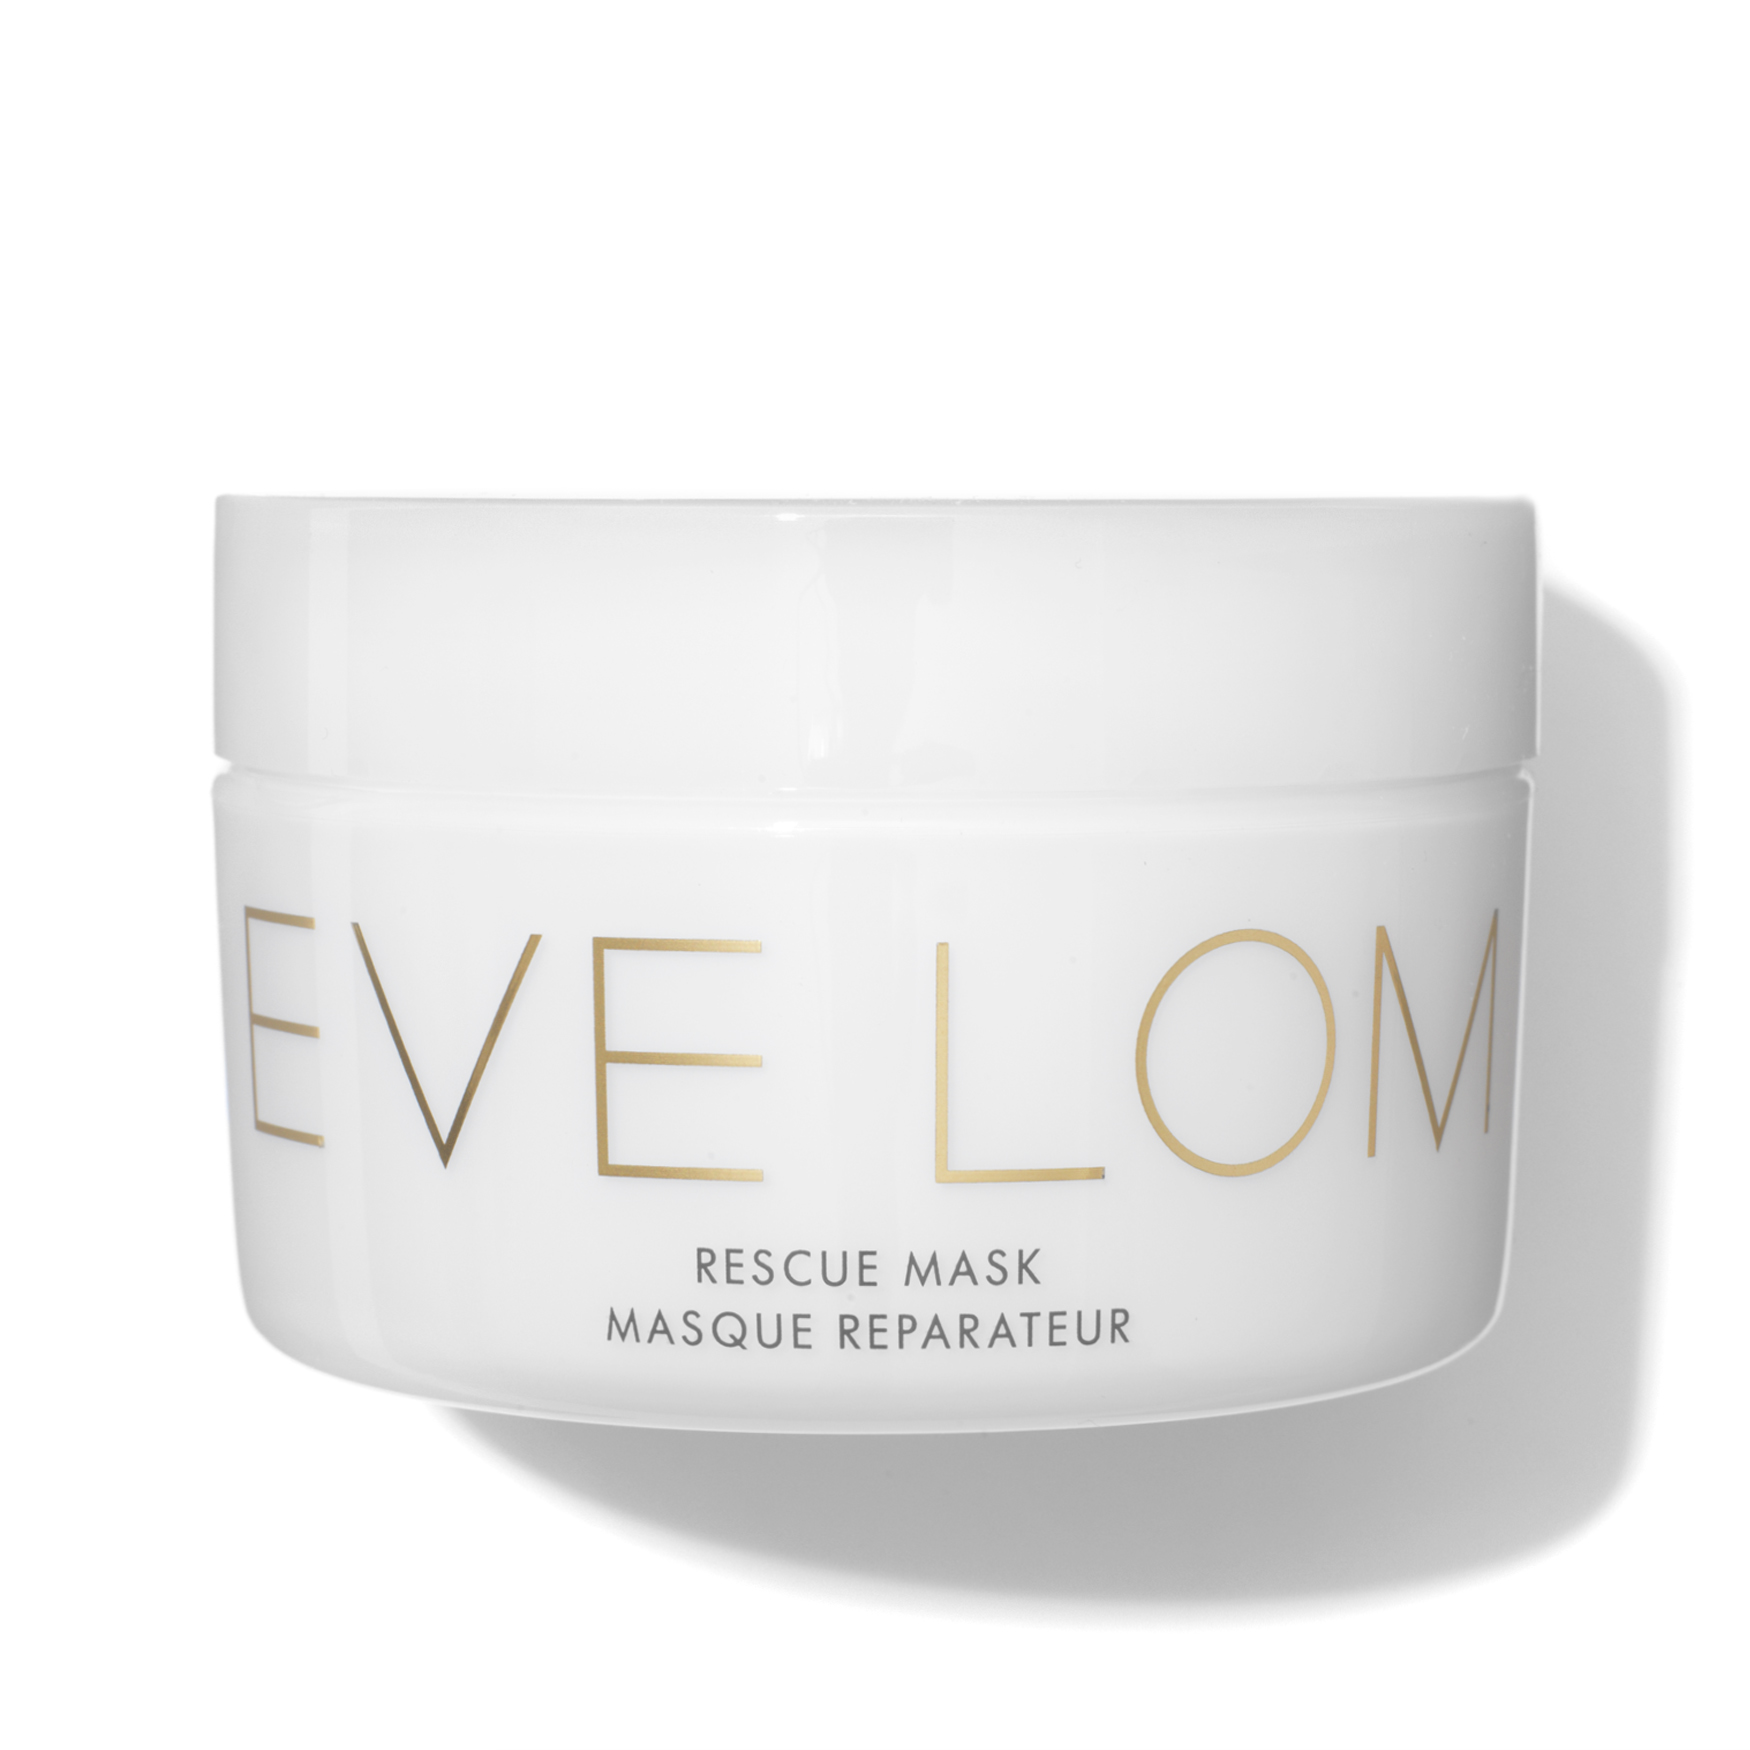 Rescue Mask 100ml - Eve Lom | Space NK